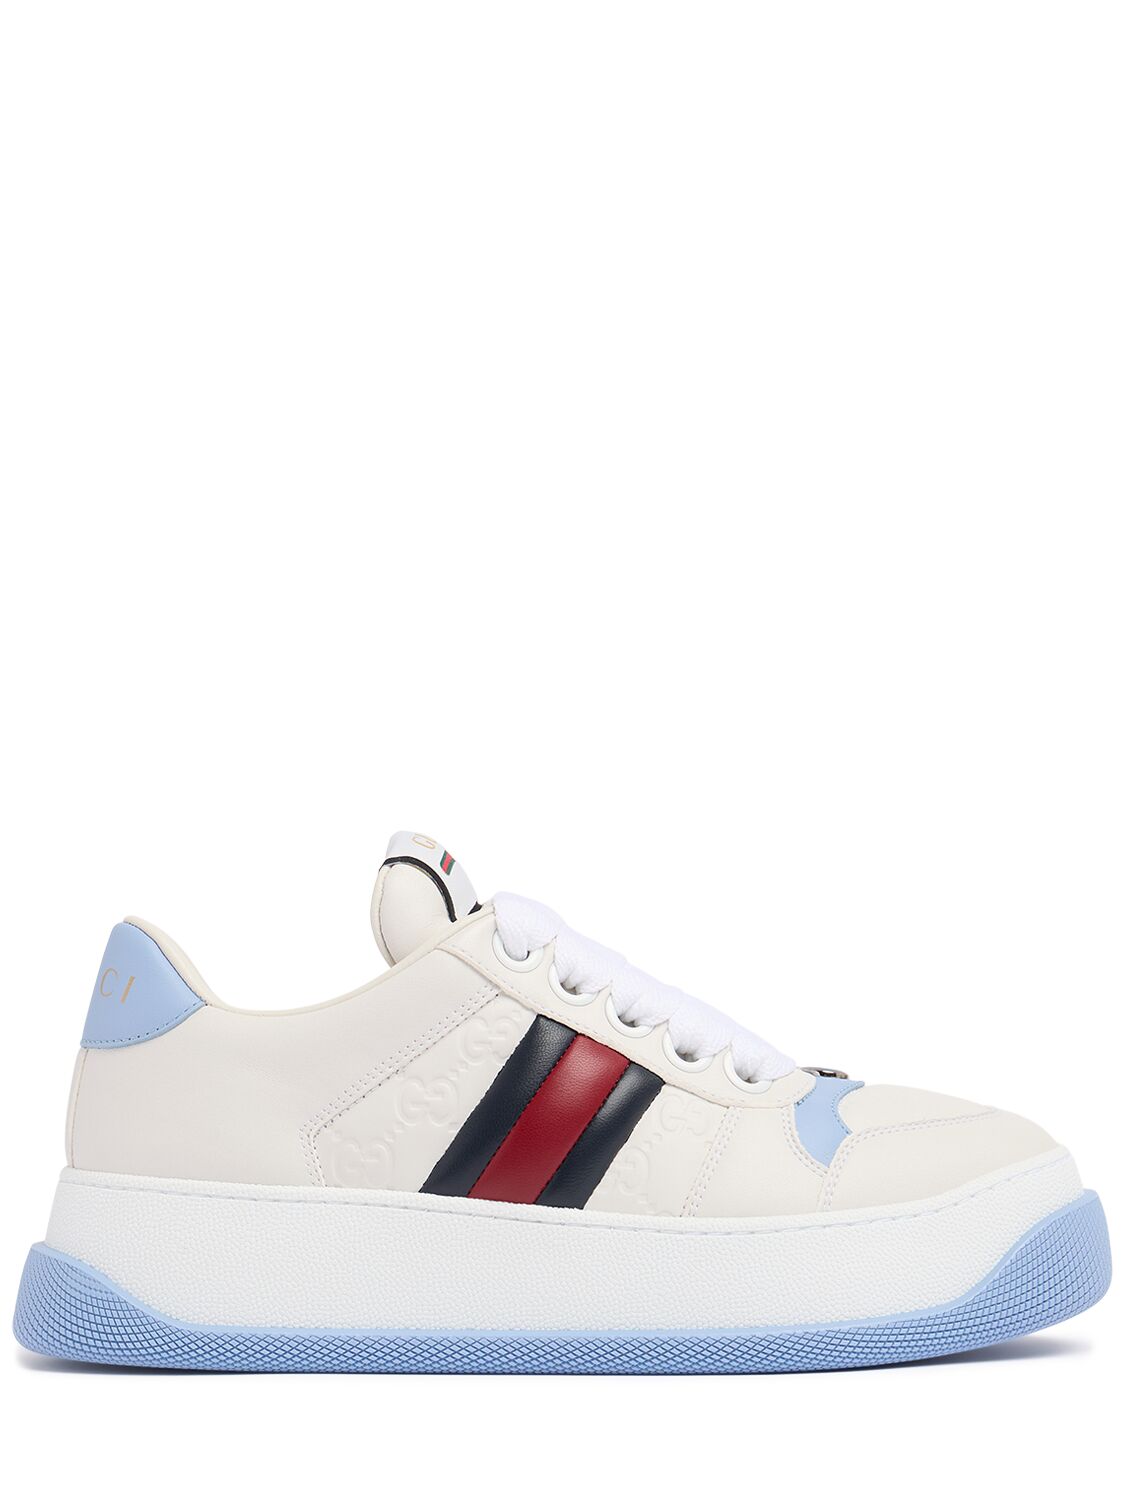 Gucci Double Screener Leather Sneakers In White/multi